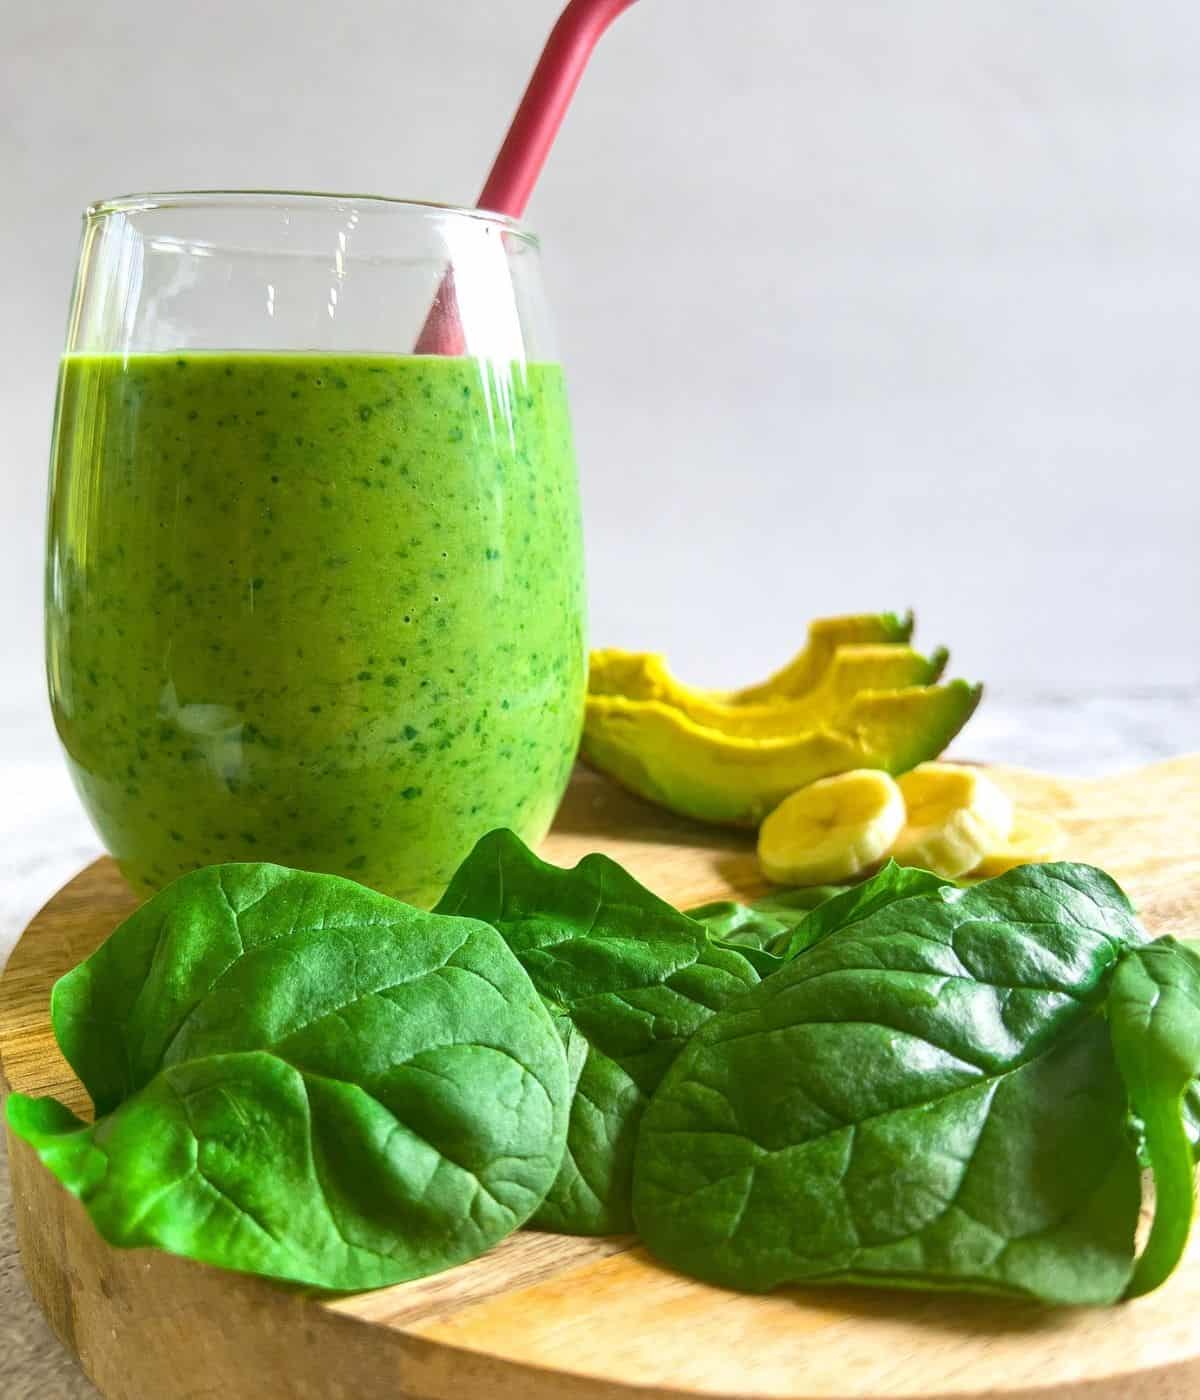 Delicious avocado spinach in a glass with ingredients.